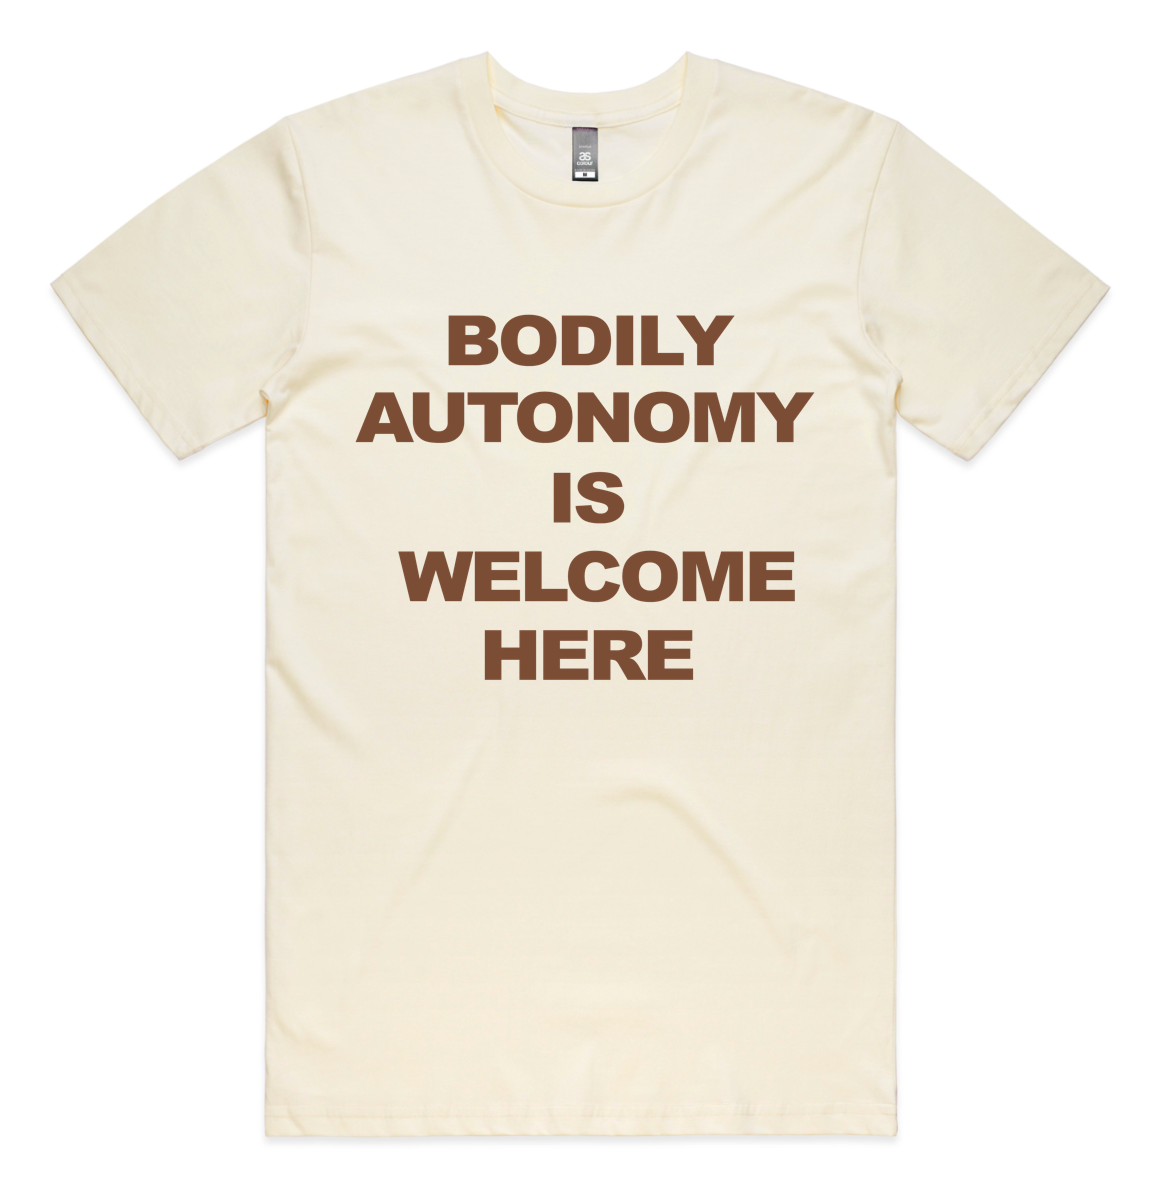 Bodily Autonomy is Welcome Here shirt